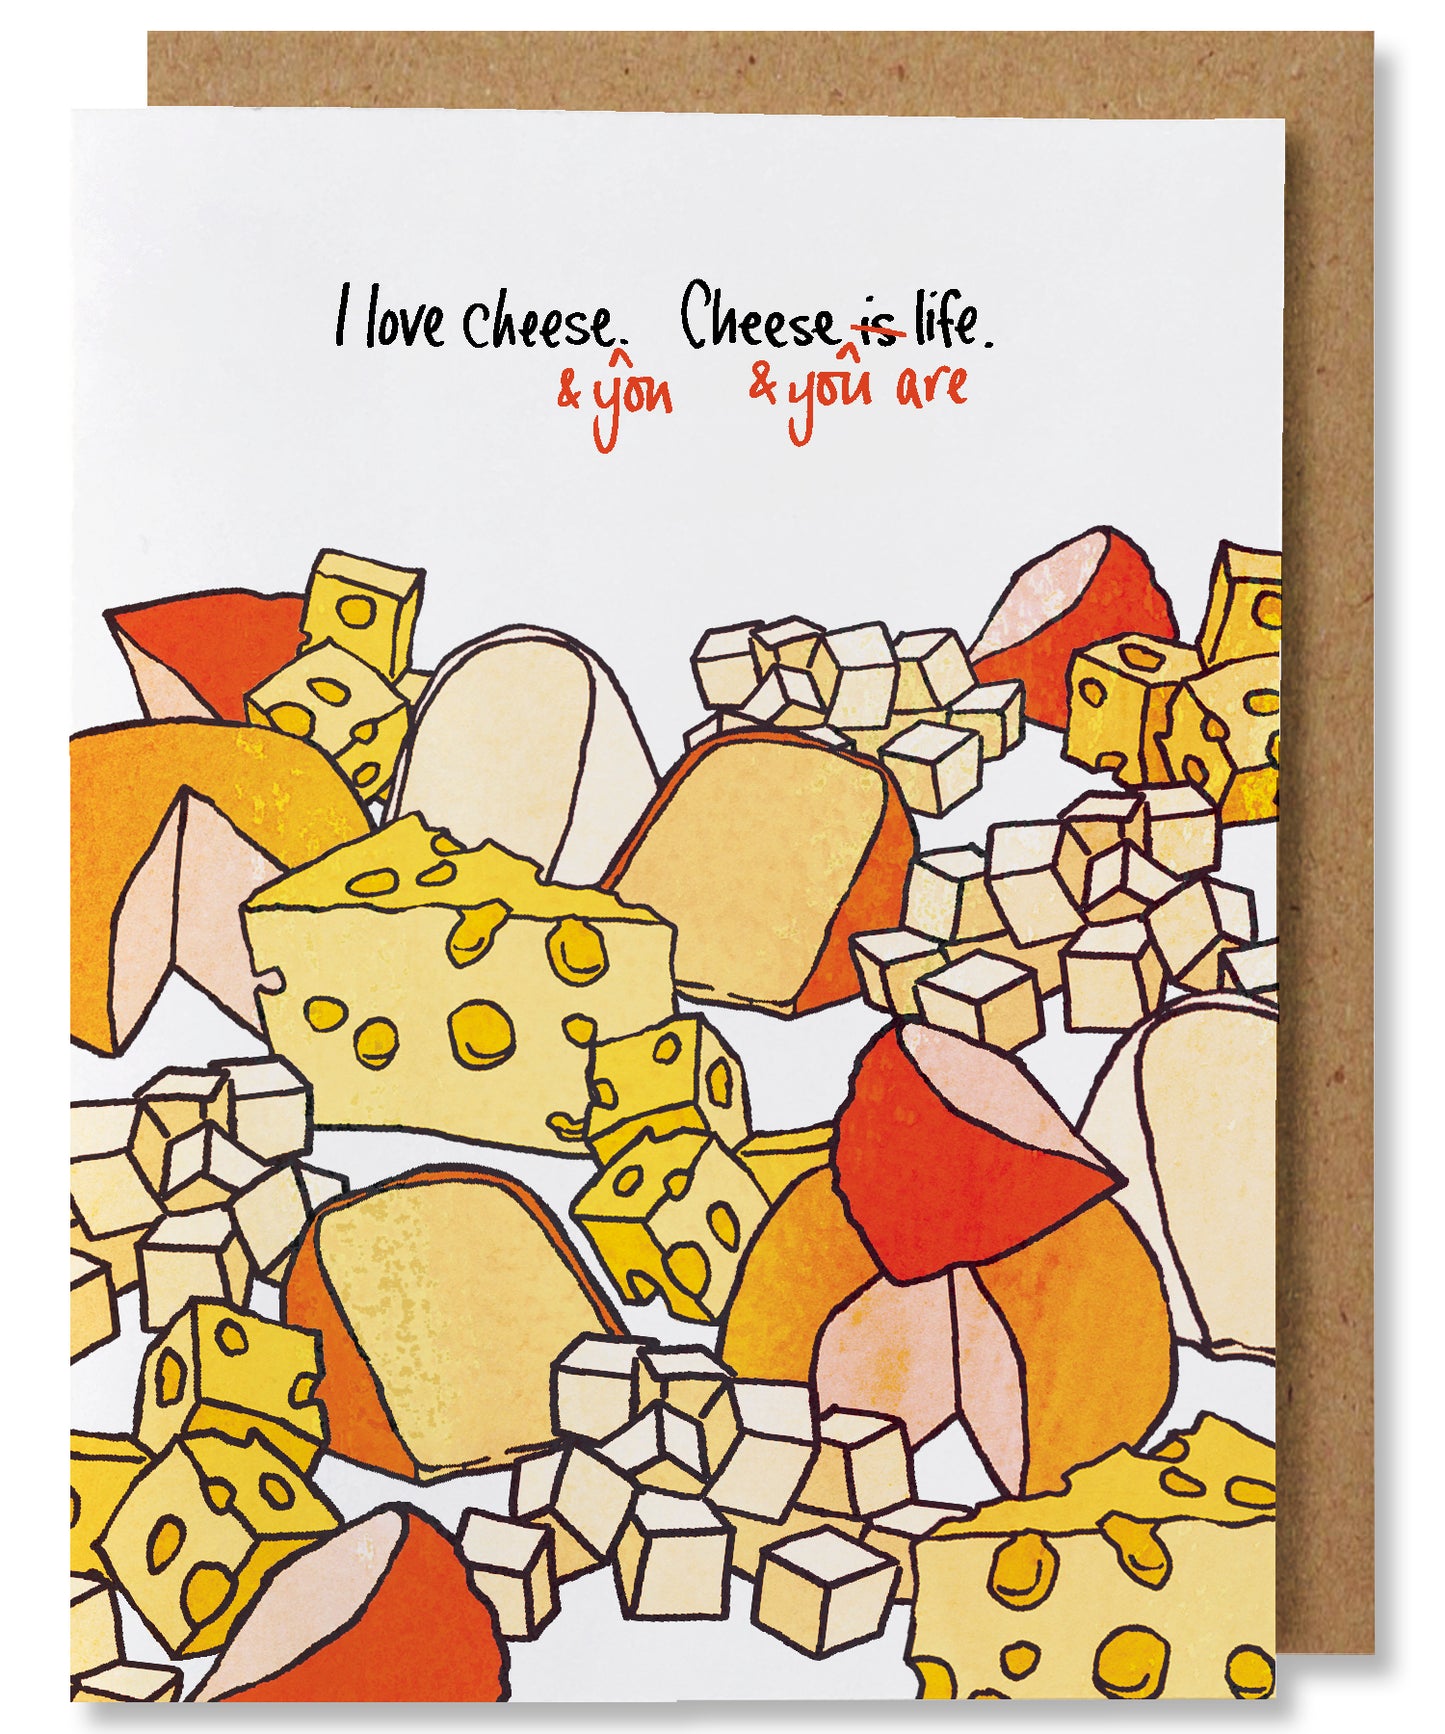 Cheese is Life - Illustrated Funny Love Friendship Card